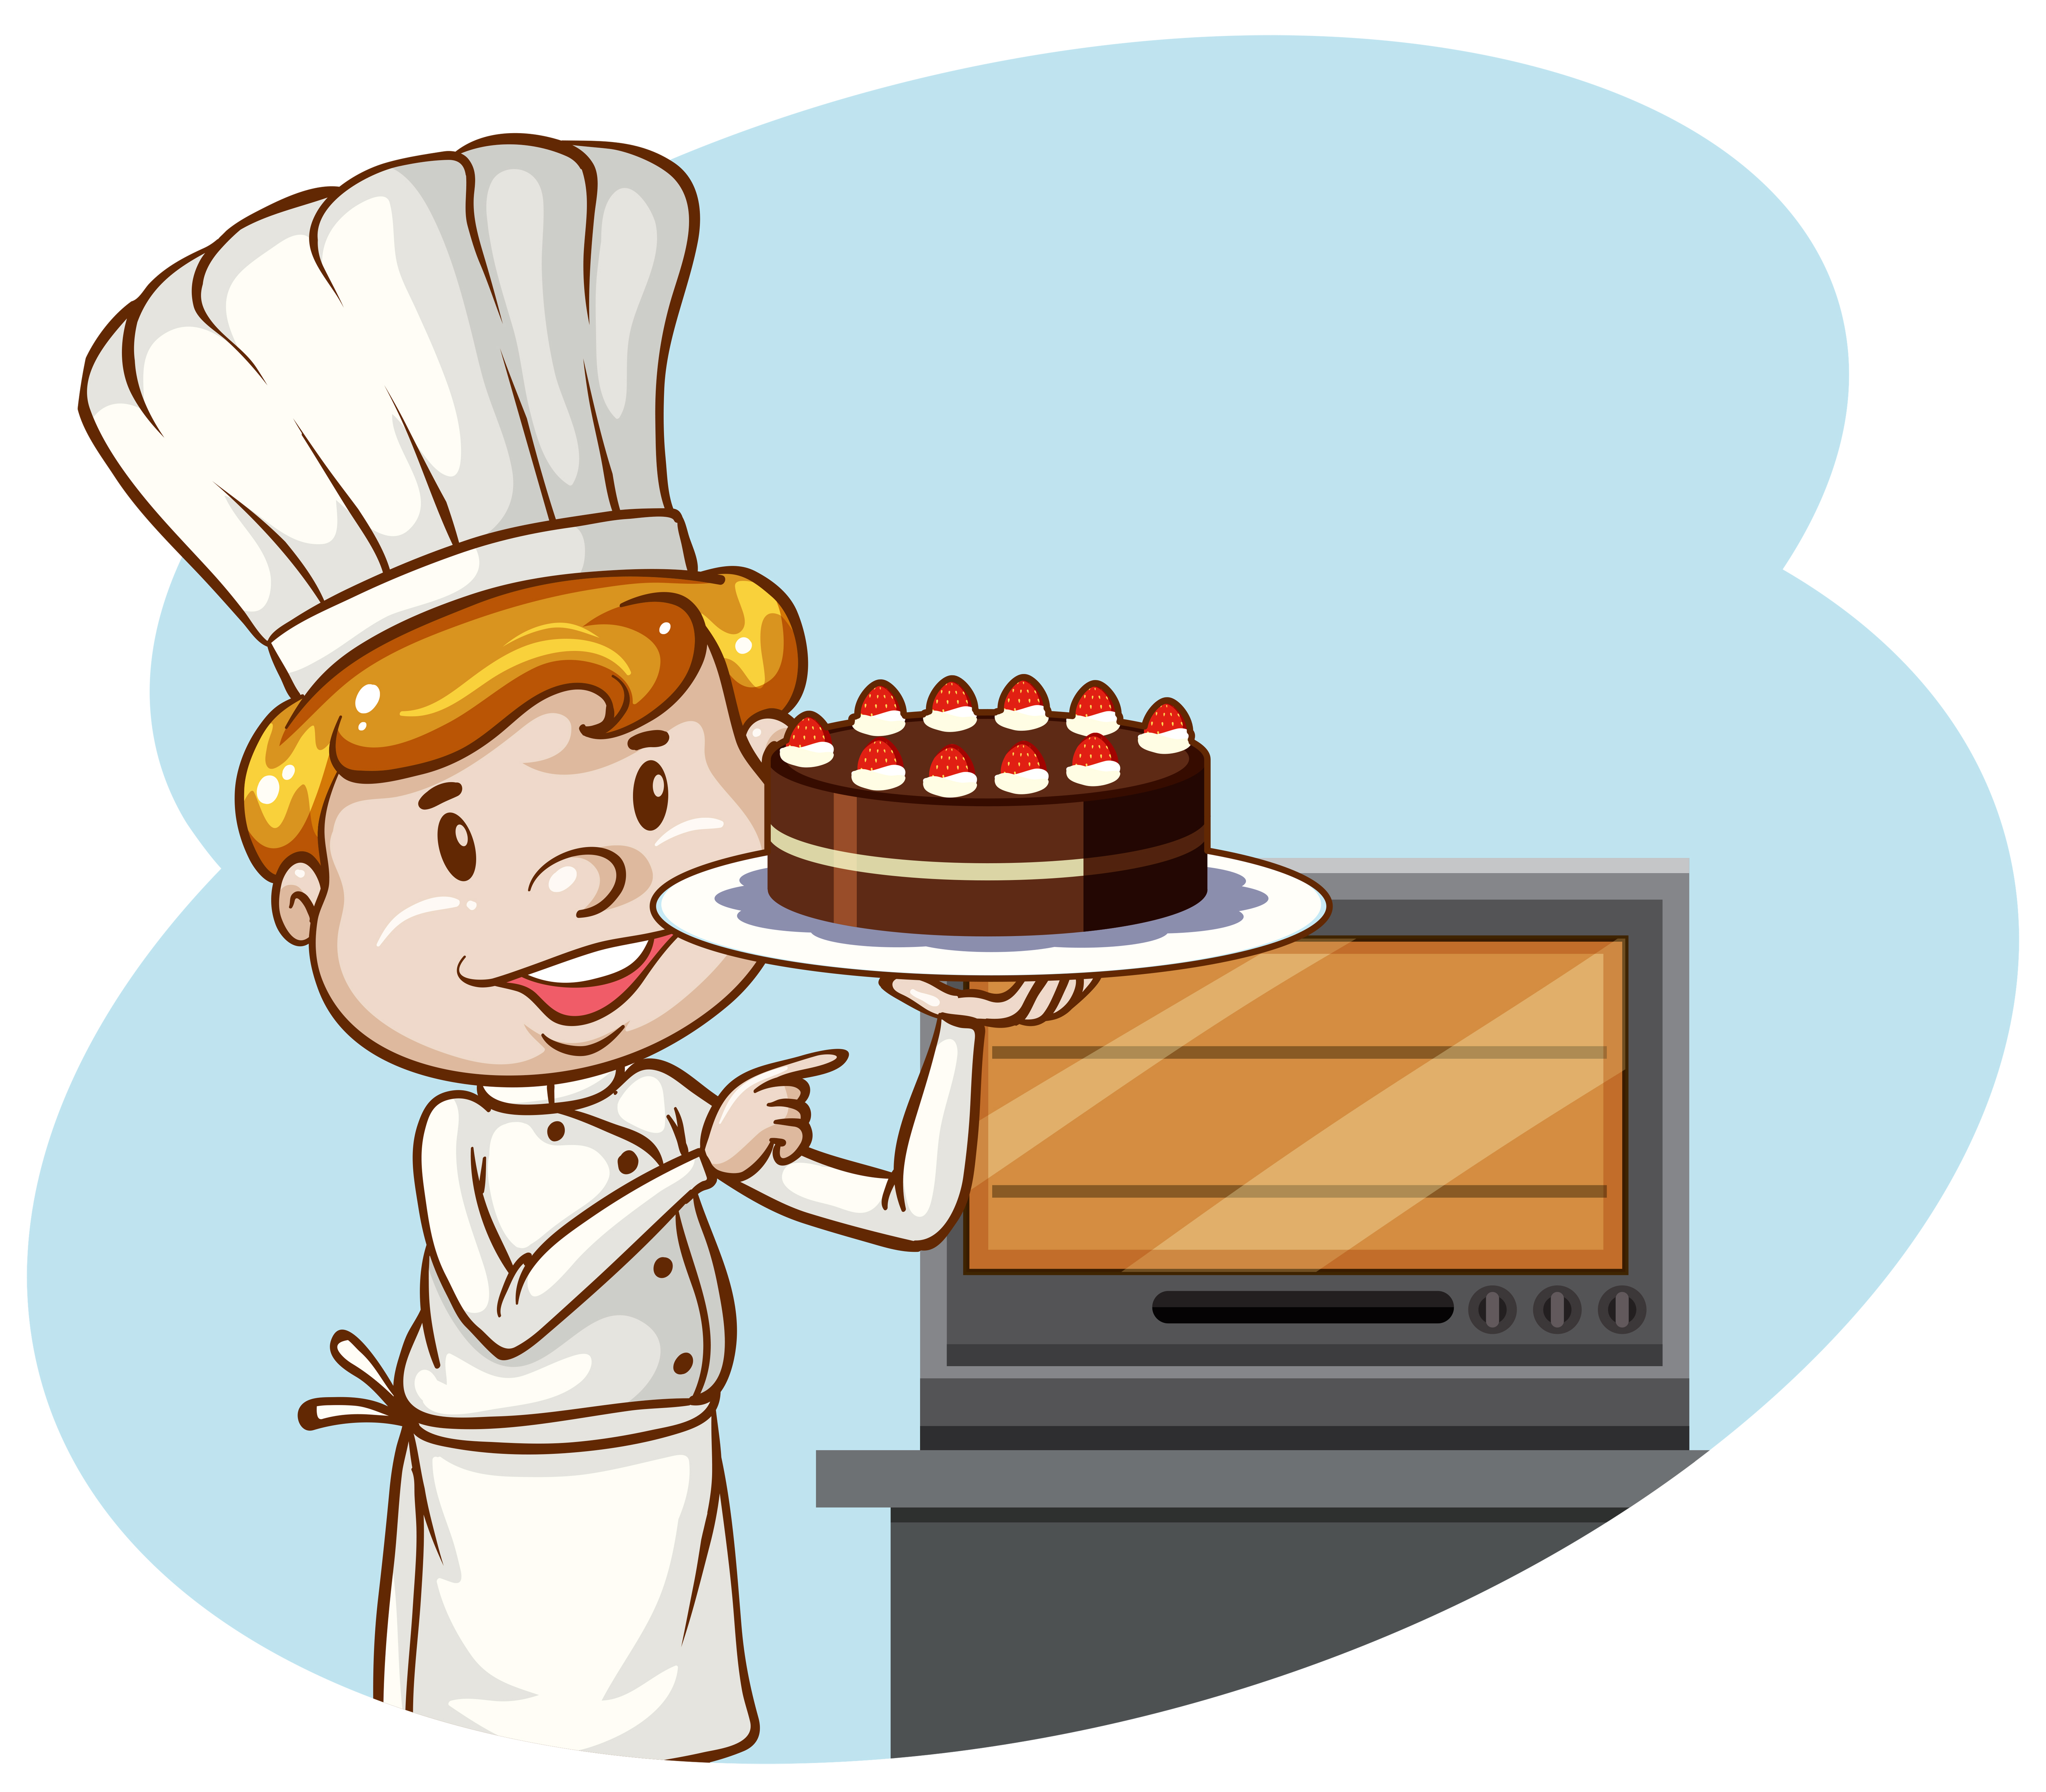 Bakery Chef Cartoon Images